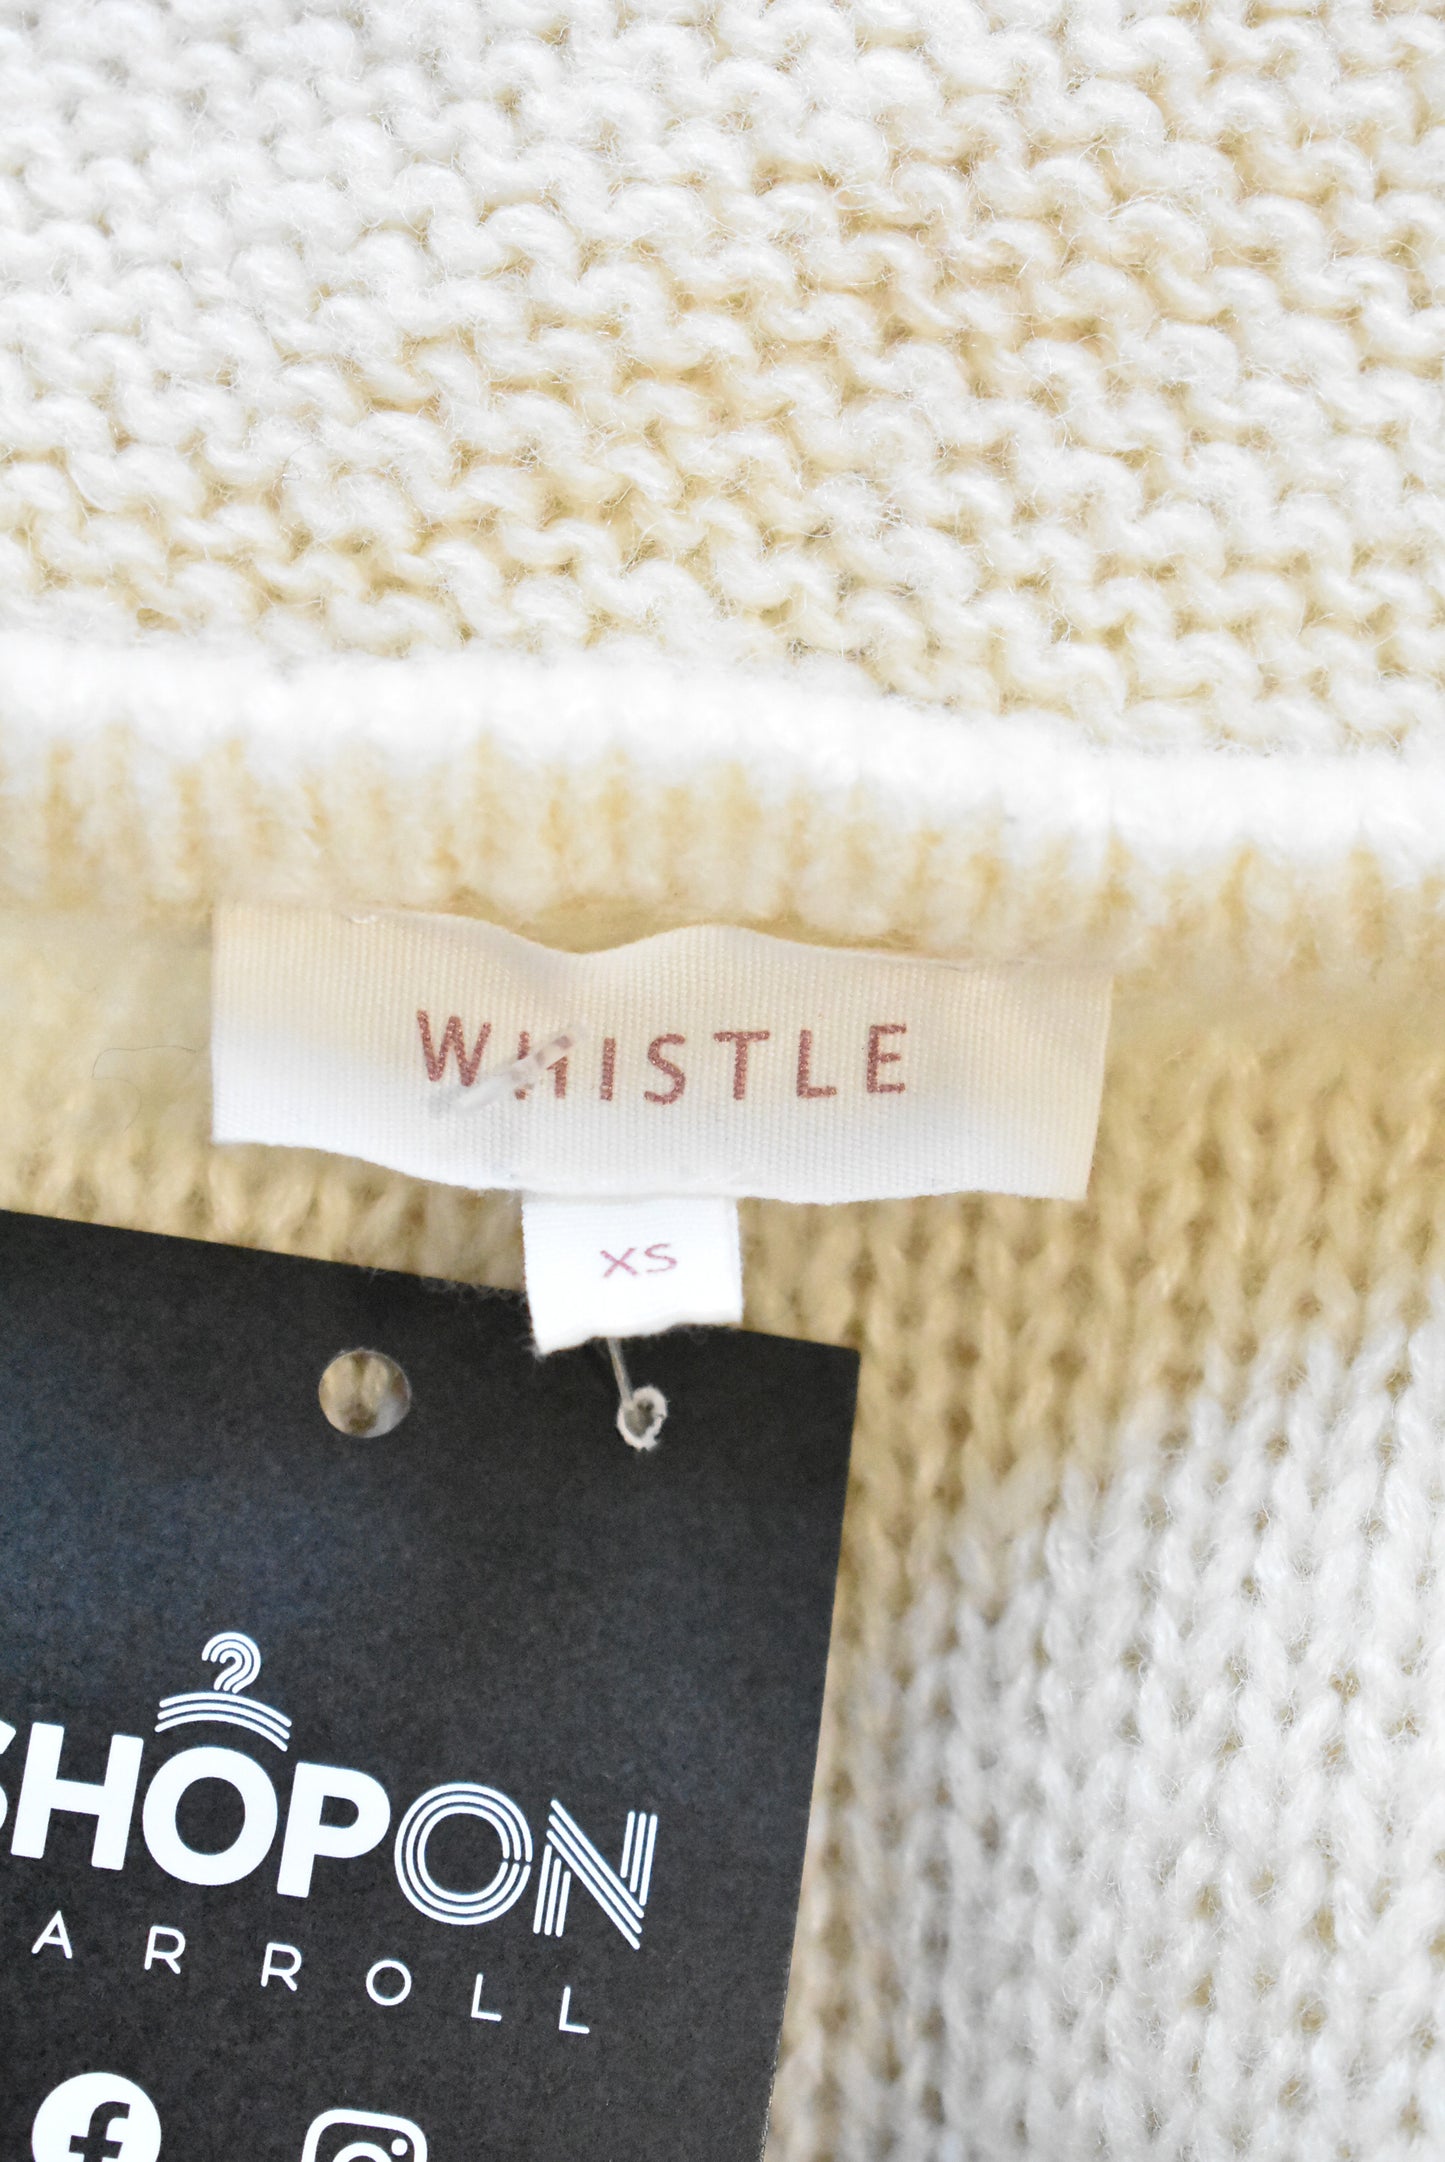 Whistle wool blend sweater, XS